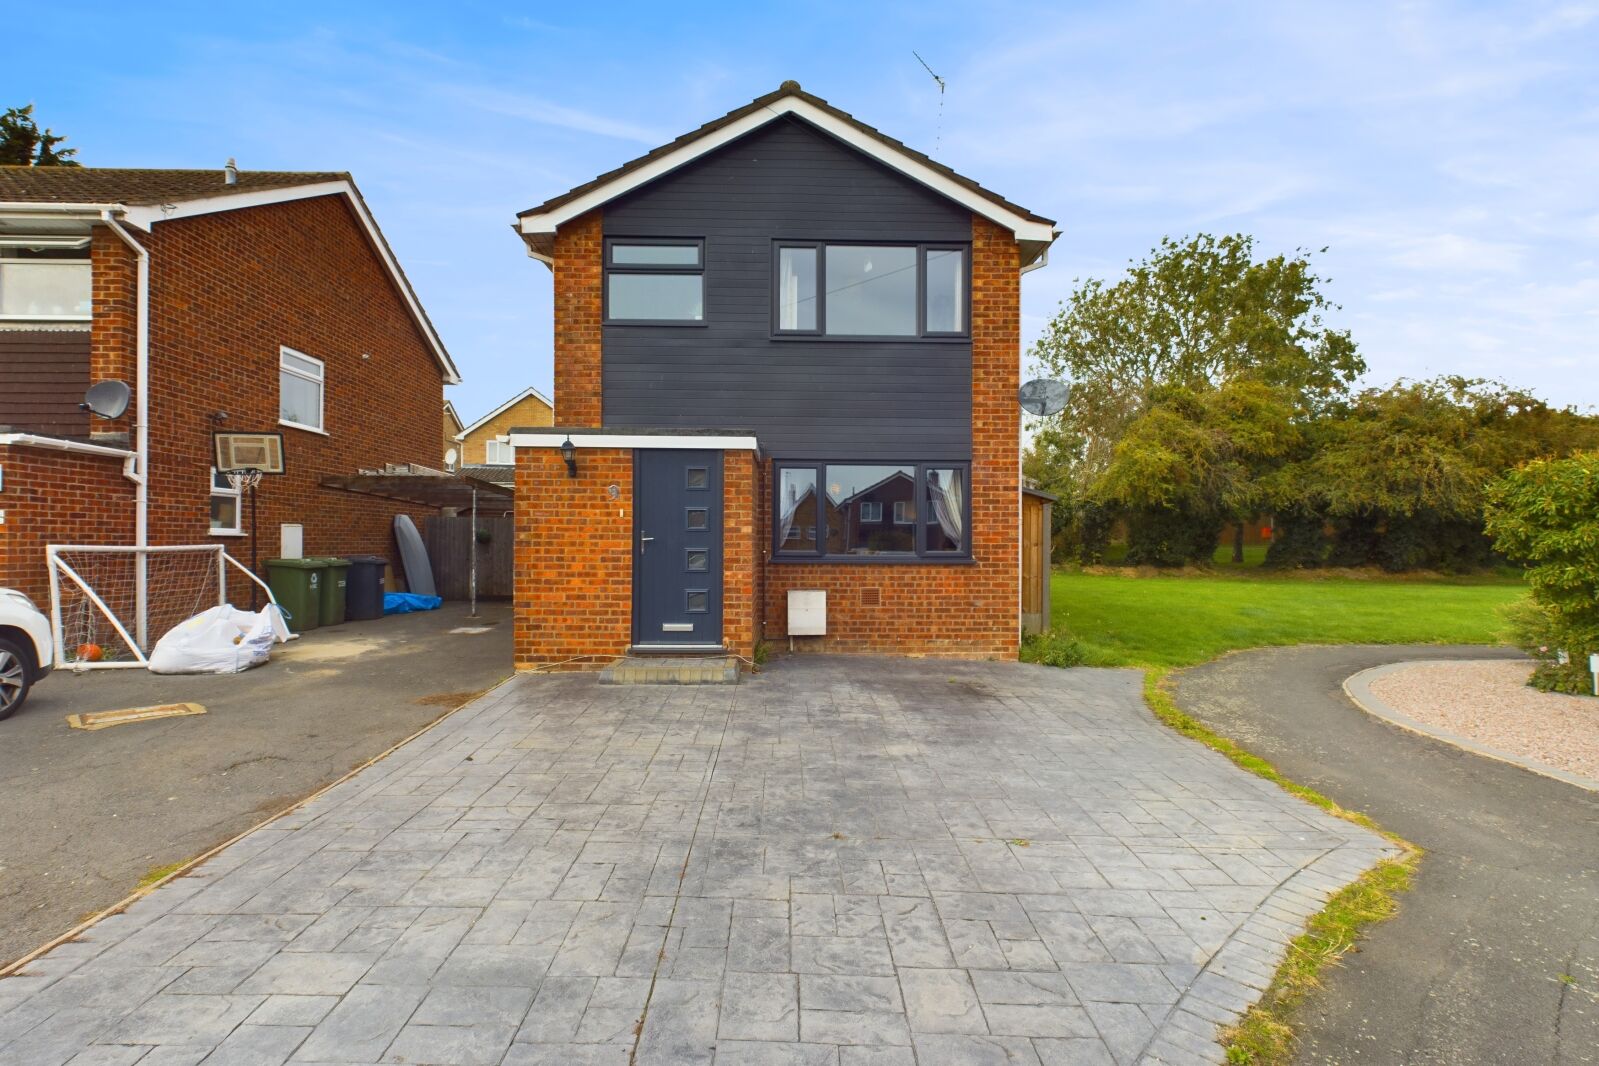 3 bedroom detached house for sale Cromwell Way, Sawtry, PE28, main image